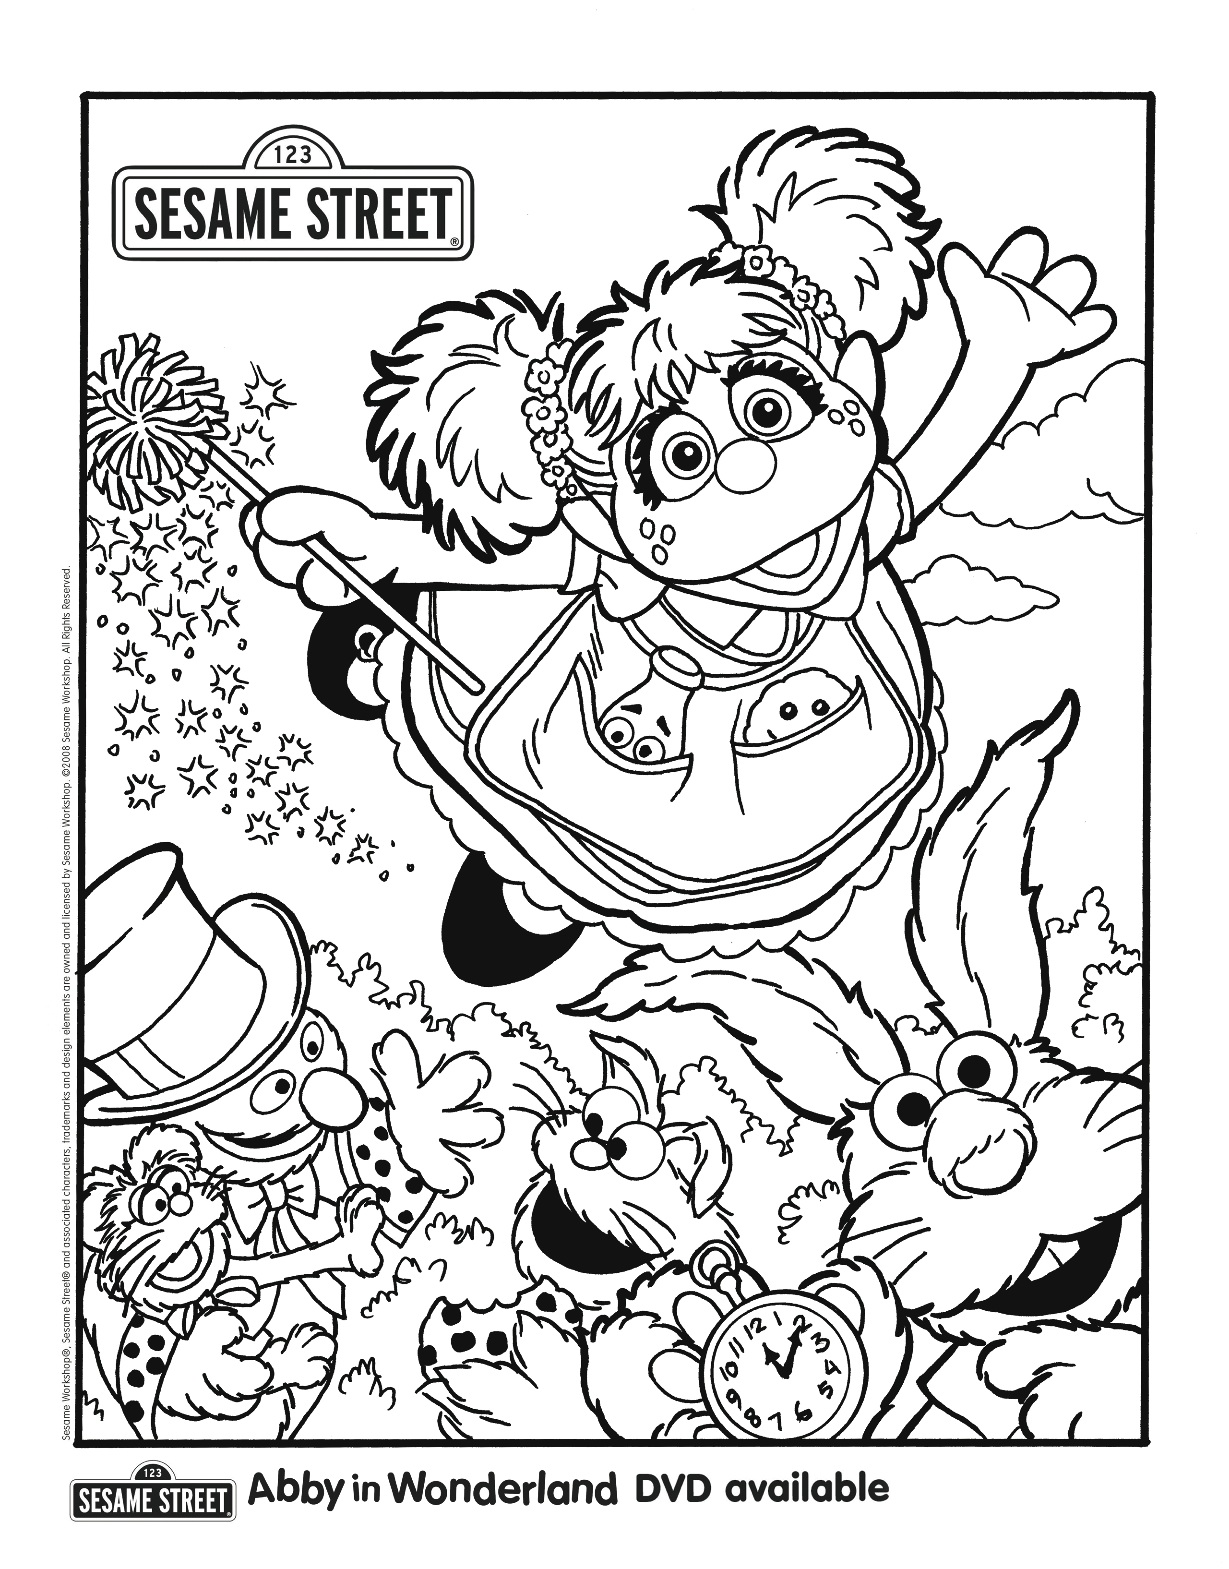 image-kidtoons-abby-coloring-sheet-jpg-muppet-wiki-fandom-powered-by-wikia